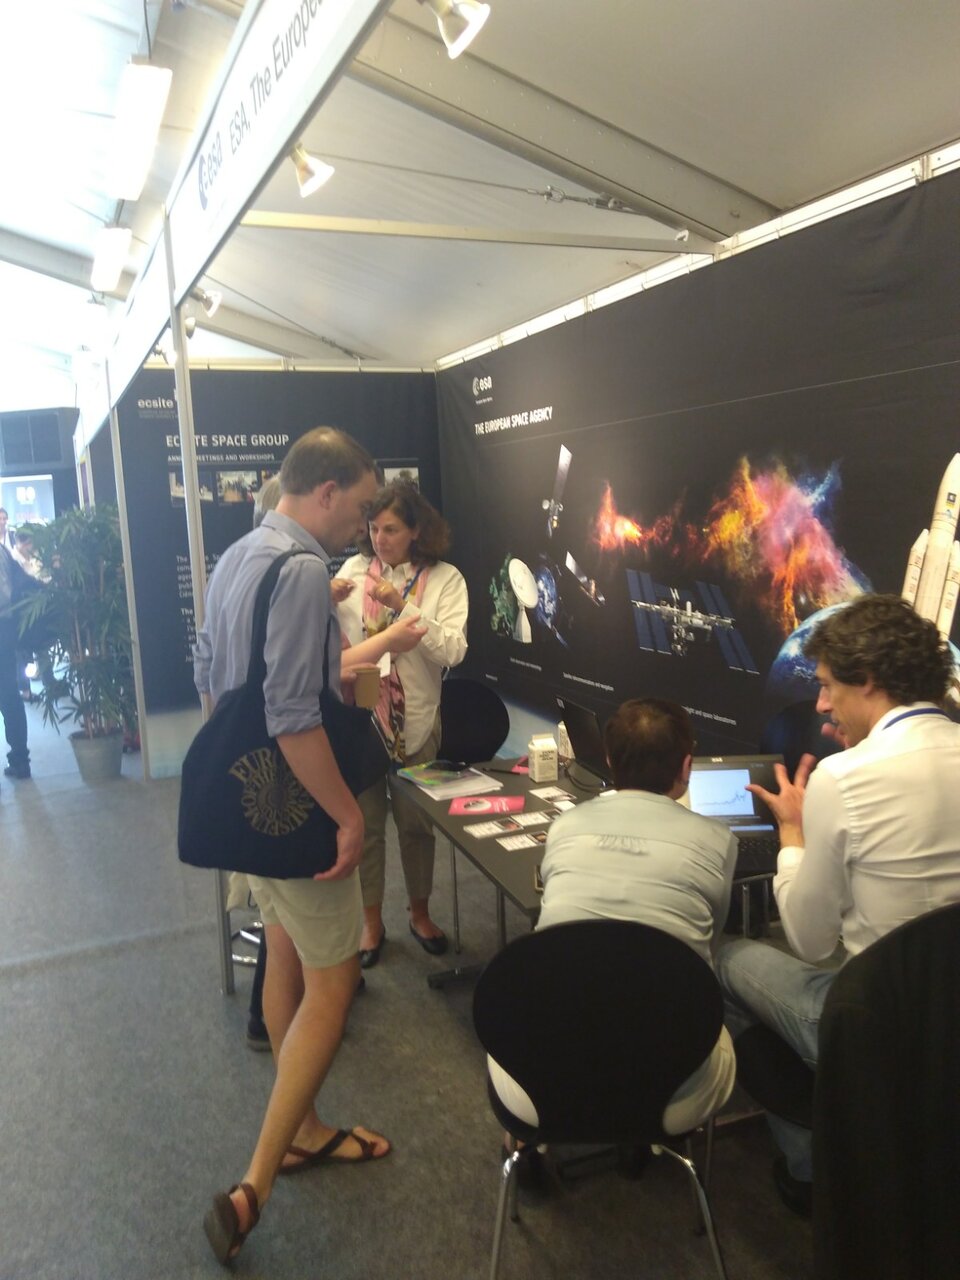 Visitors learn about opportunities offered by ESA and the Ecsite Space Group 